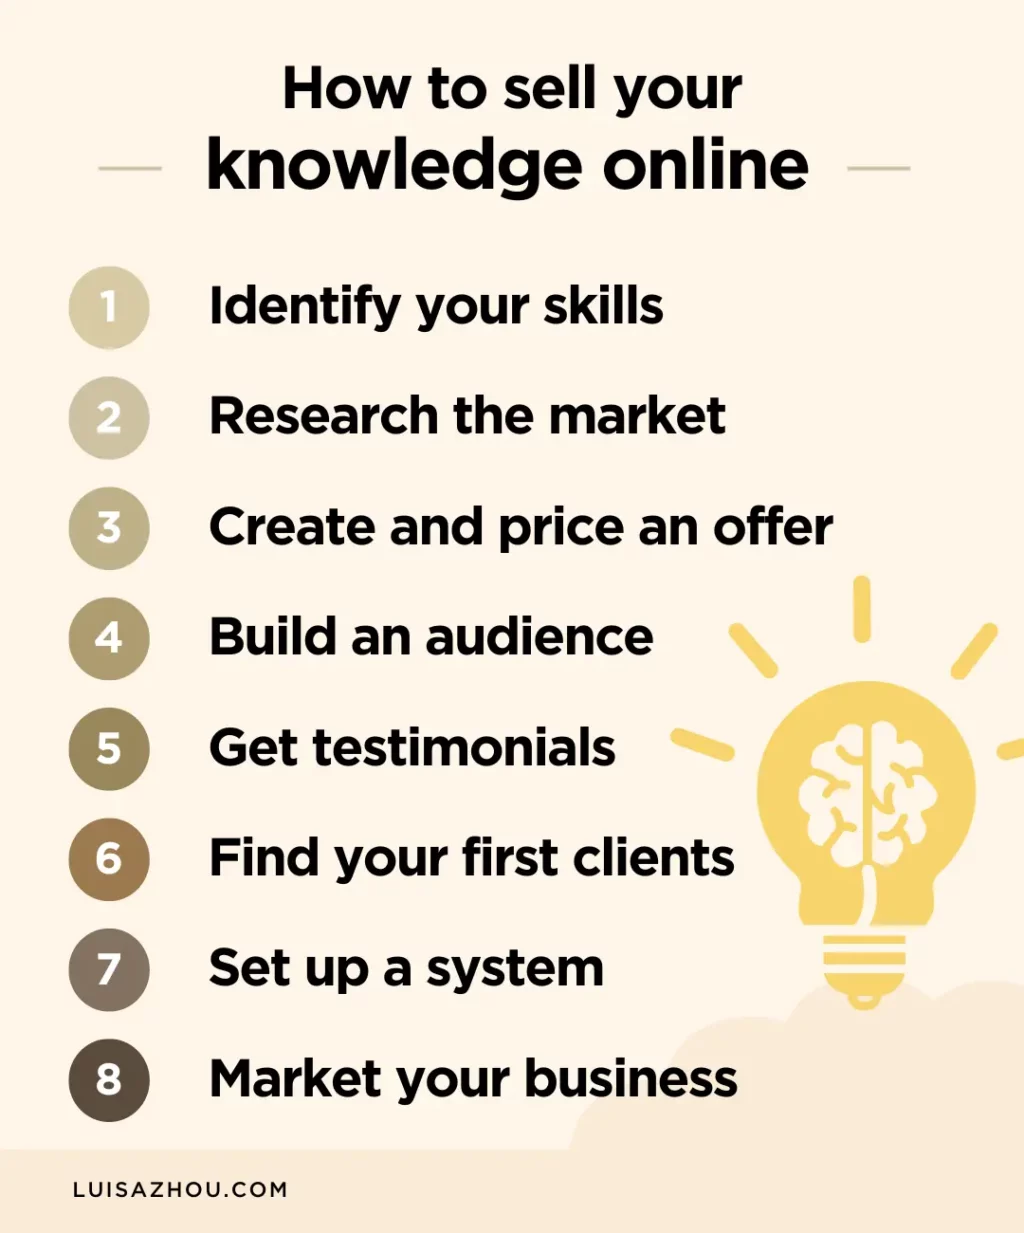 Steps to sell your knowledge online